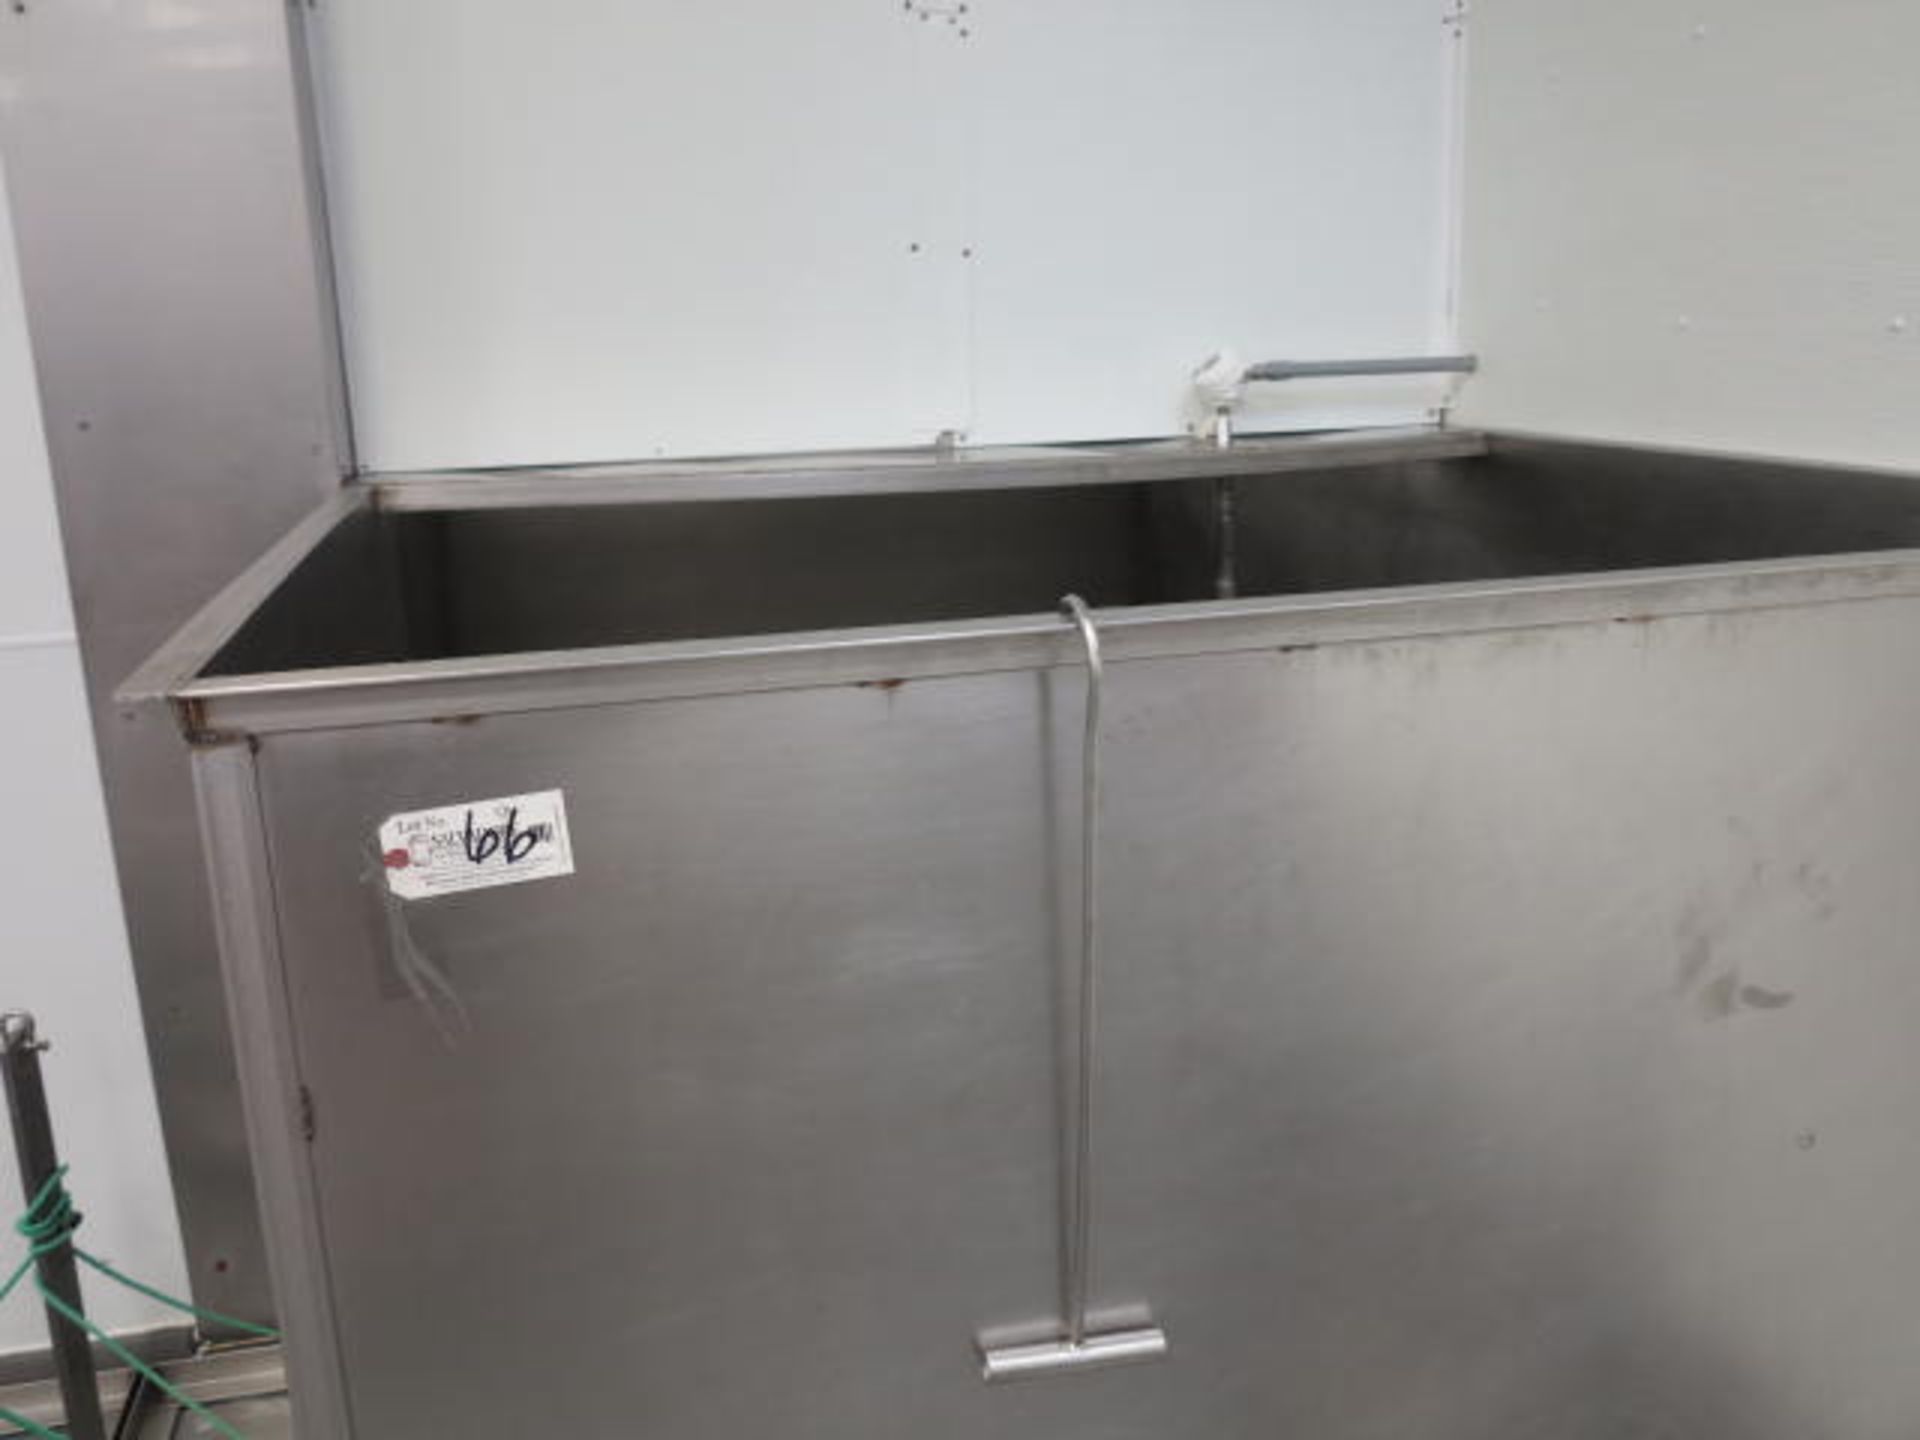 6' x 10' x 50'' Stainless Steel Boiler with 4 Heating Jets, Gas Fired Burners